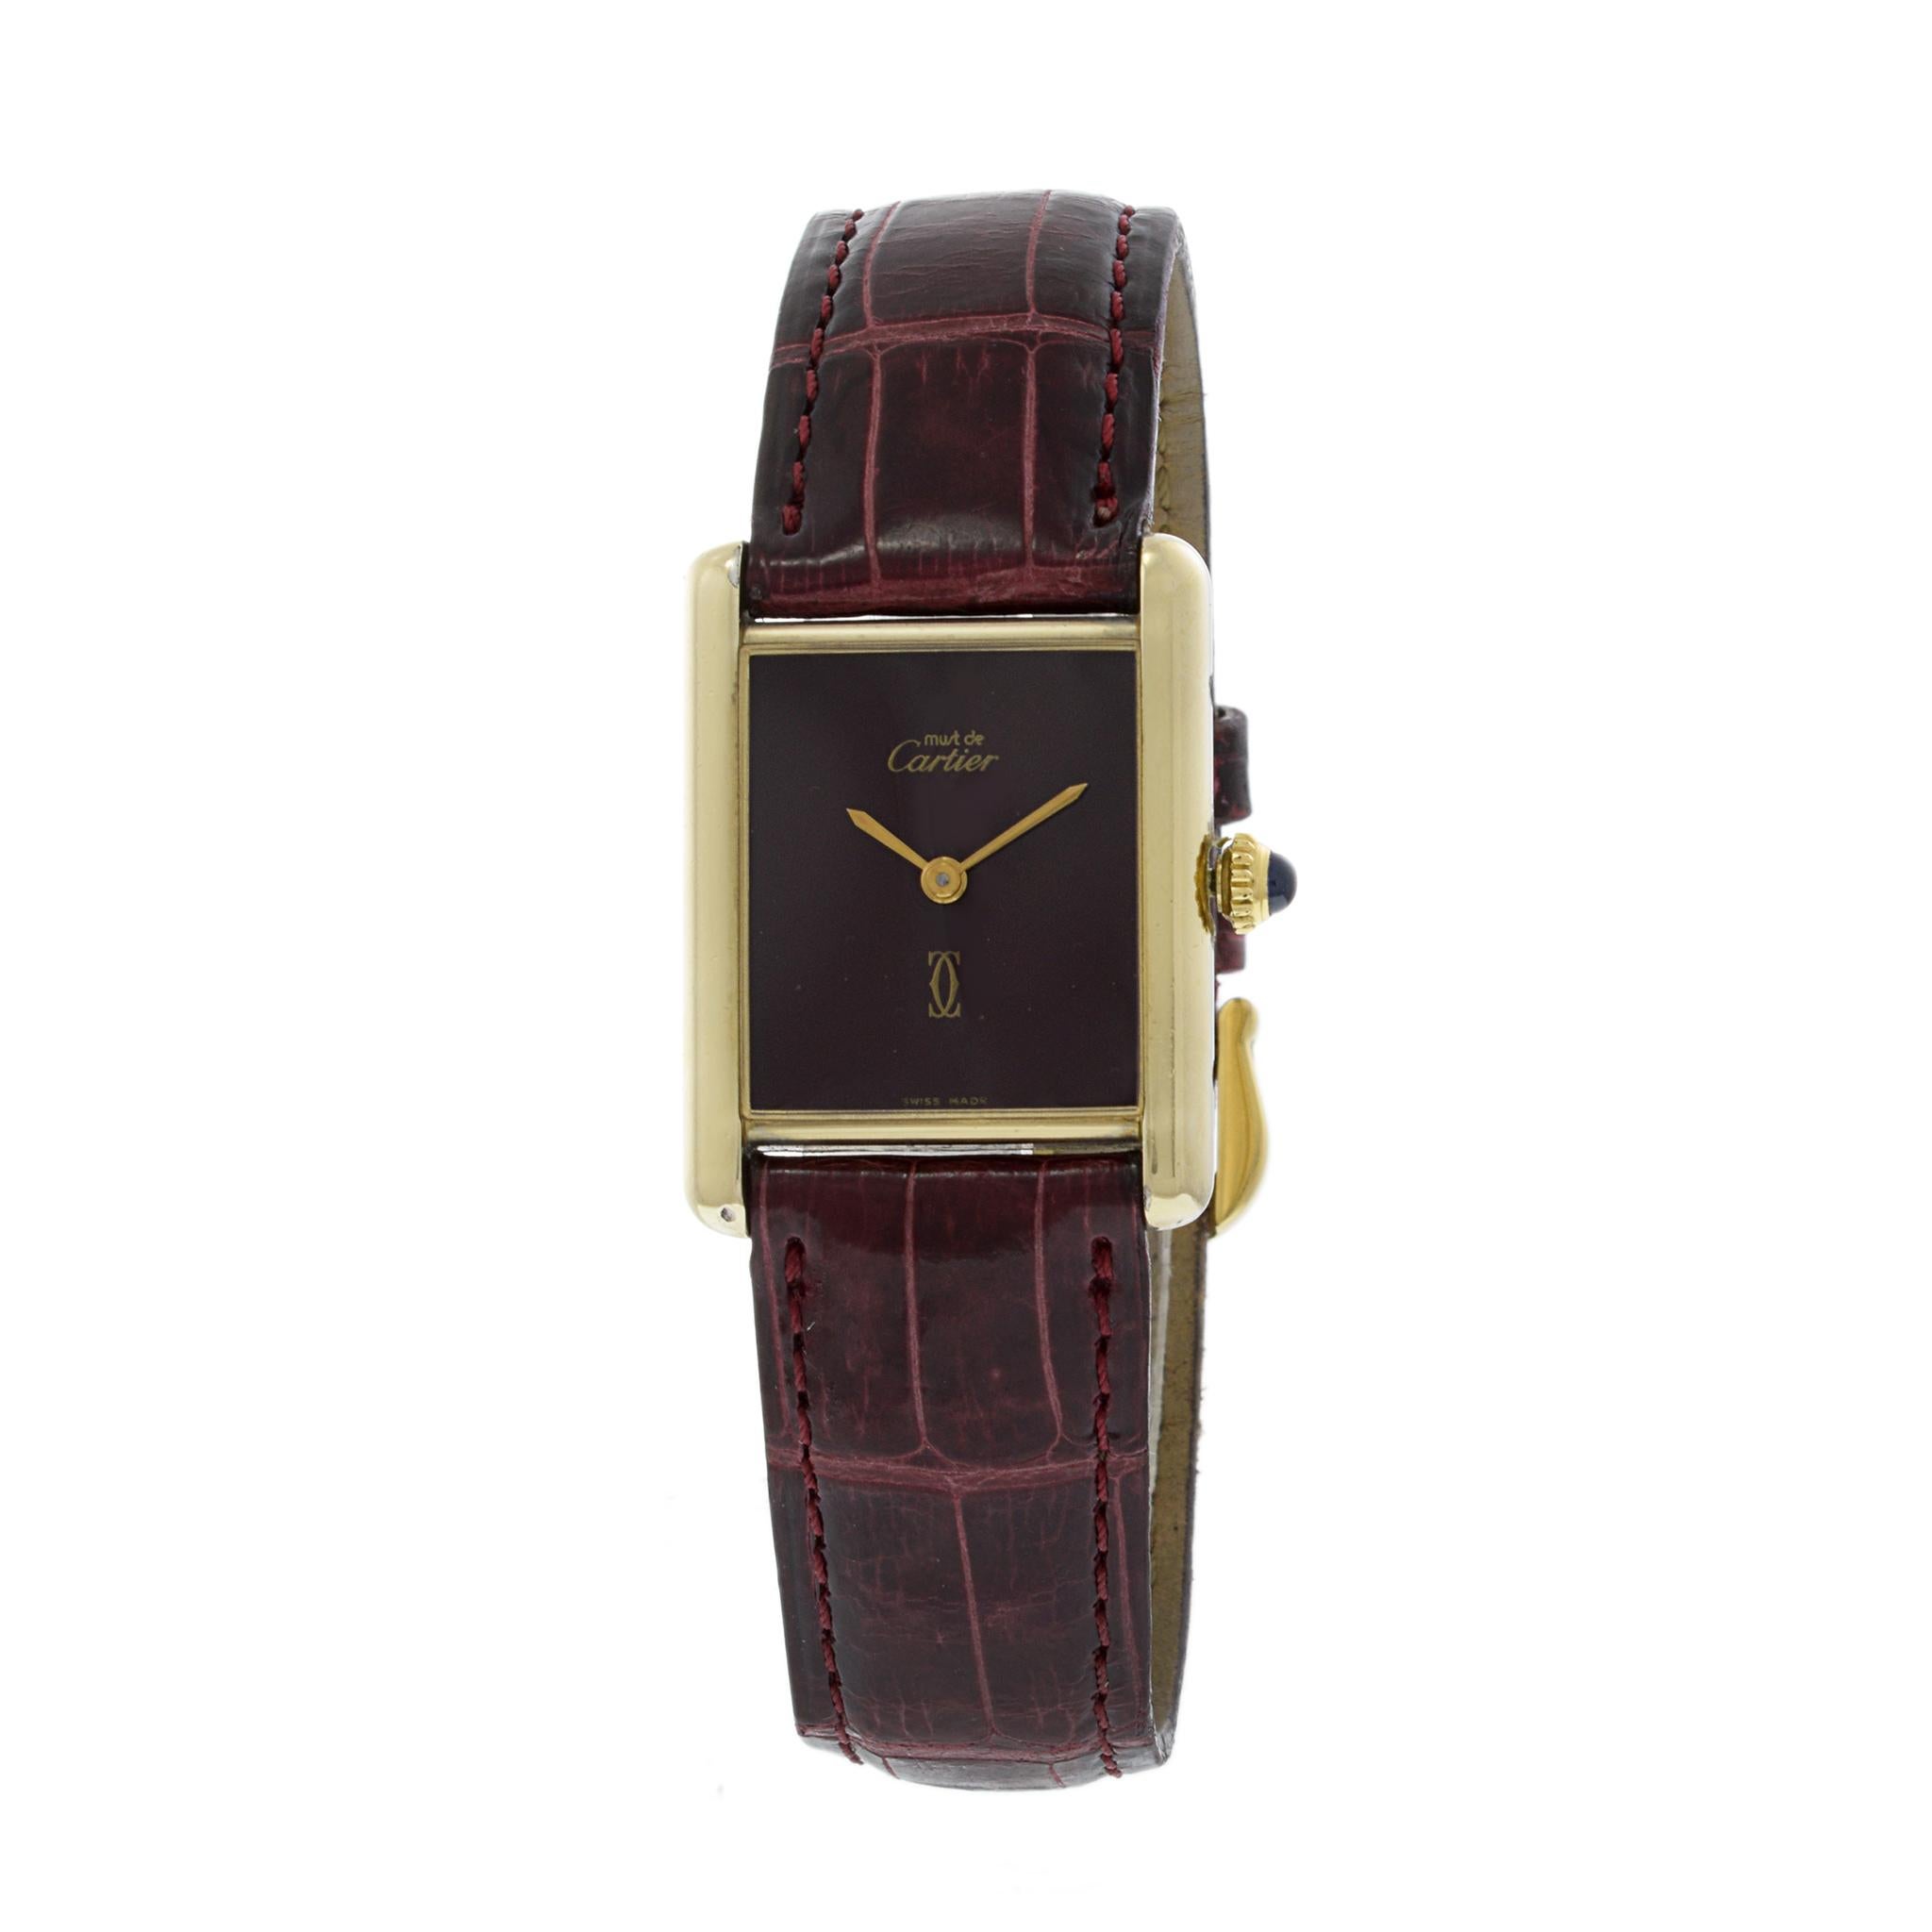 Introducing the Cartier Tank Vermeil Watch: Timeless Elegance.

Embrace refined luxury with the Cartier Tank Vermeil Watch. This iconic timepiece from the 1970s boasts a bordeaux dial, radiating timeless sophistication. The 23.5mm x 30.5mm